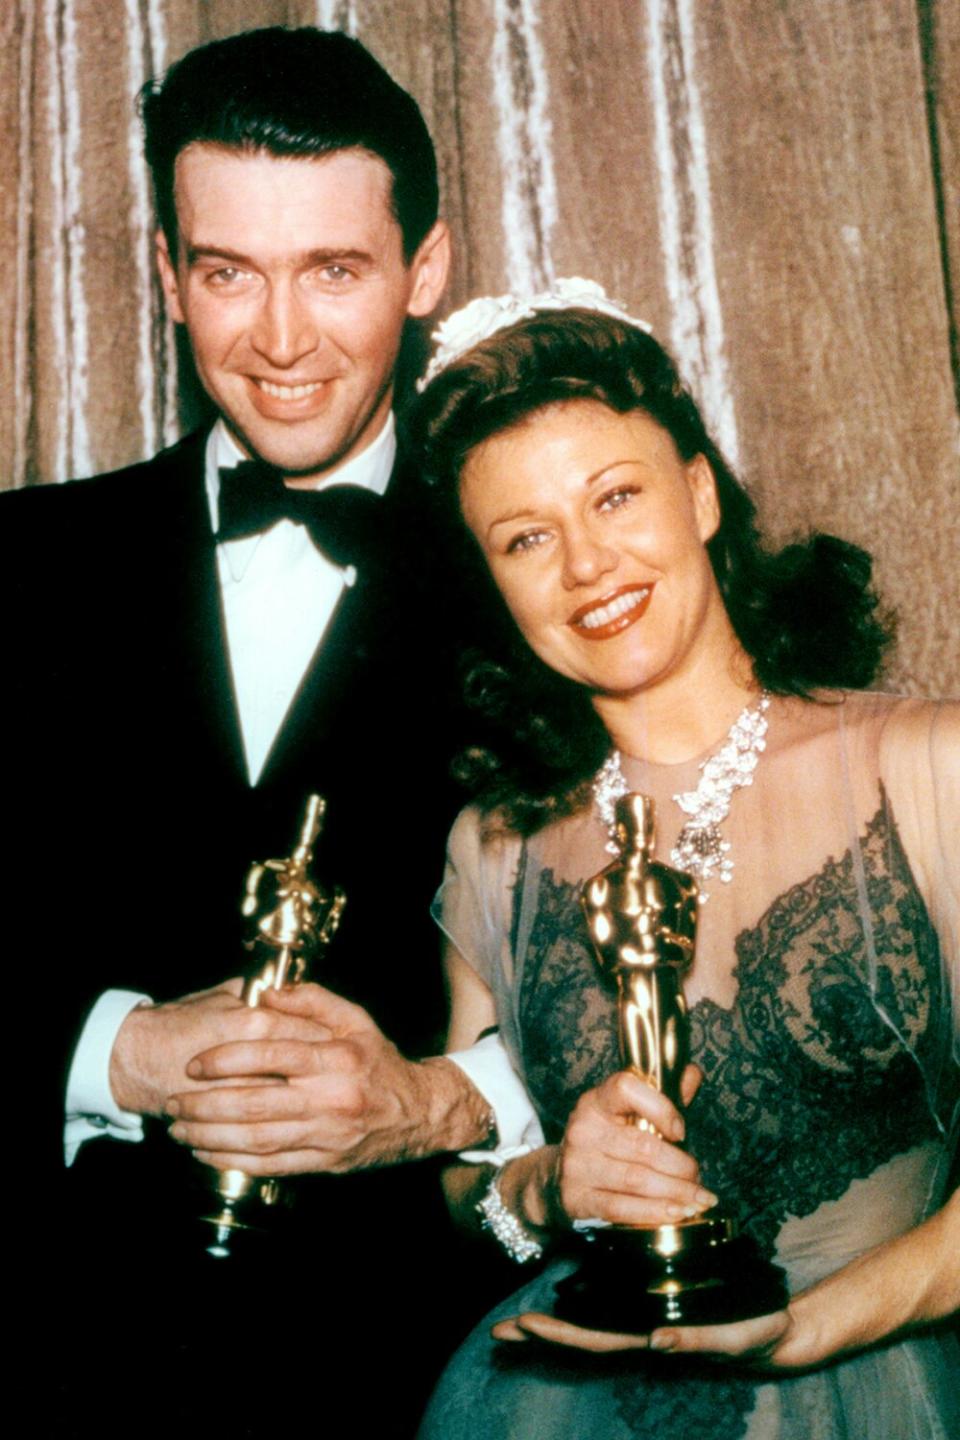 James Stewart (1908-1997), US actor, wearing a black tuxedo, a white shirt and black bow tie, with Ginger Rogers (1911-1995), US actress and dancer, wearing an evening gown, both holding their Oscar statuettes, at the 13th Academy Awards, at the Biltmore Hotel in Los Angeles, California, USA, 27 February 1941. Stewart won Best Actor in a Leading Role for his performance in 'The Philadelphia Story', and Rogers won Best Actress in a Leading Role for her performance in 'Kitty Foyle'. (Photo by Hulton Archive/Getty Images)